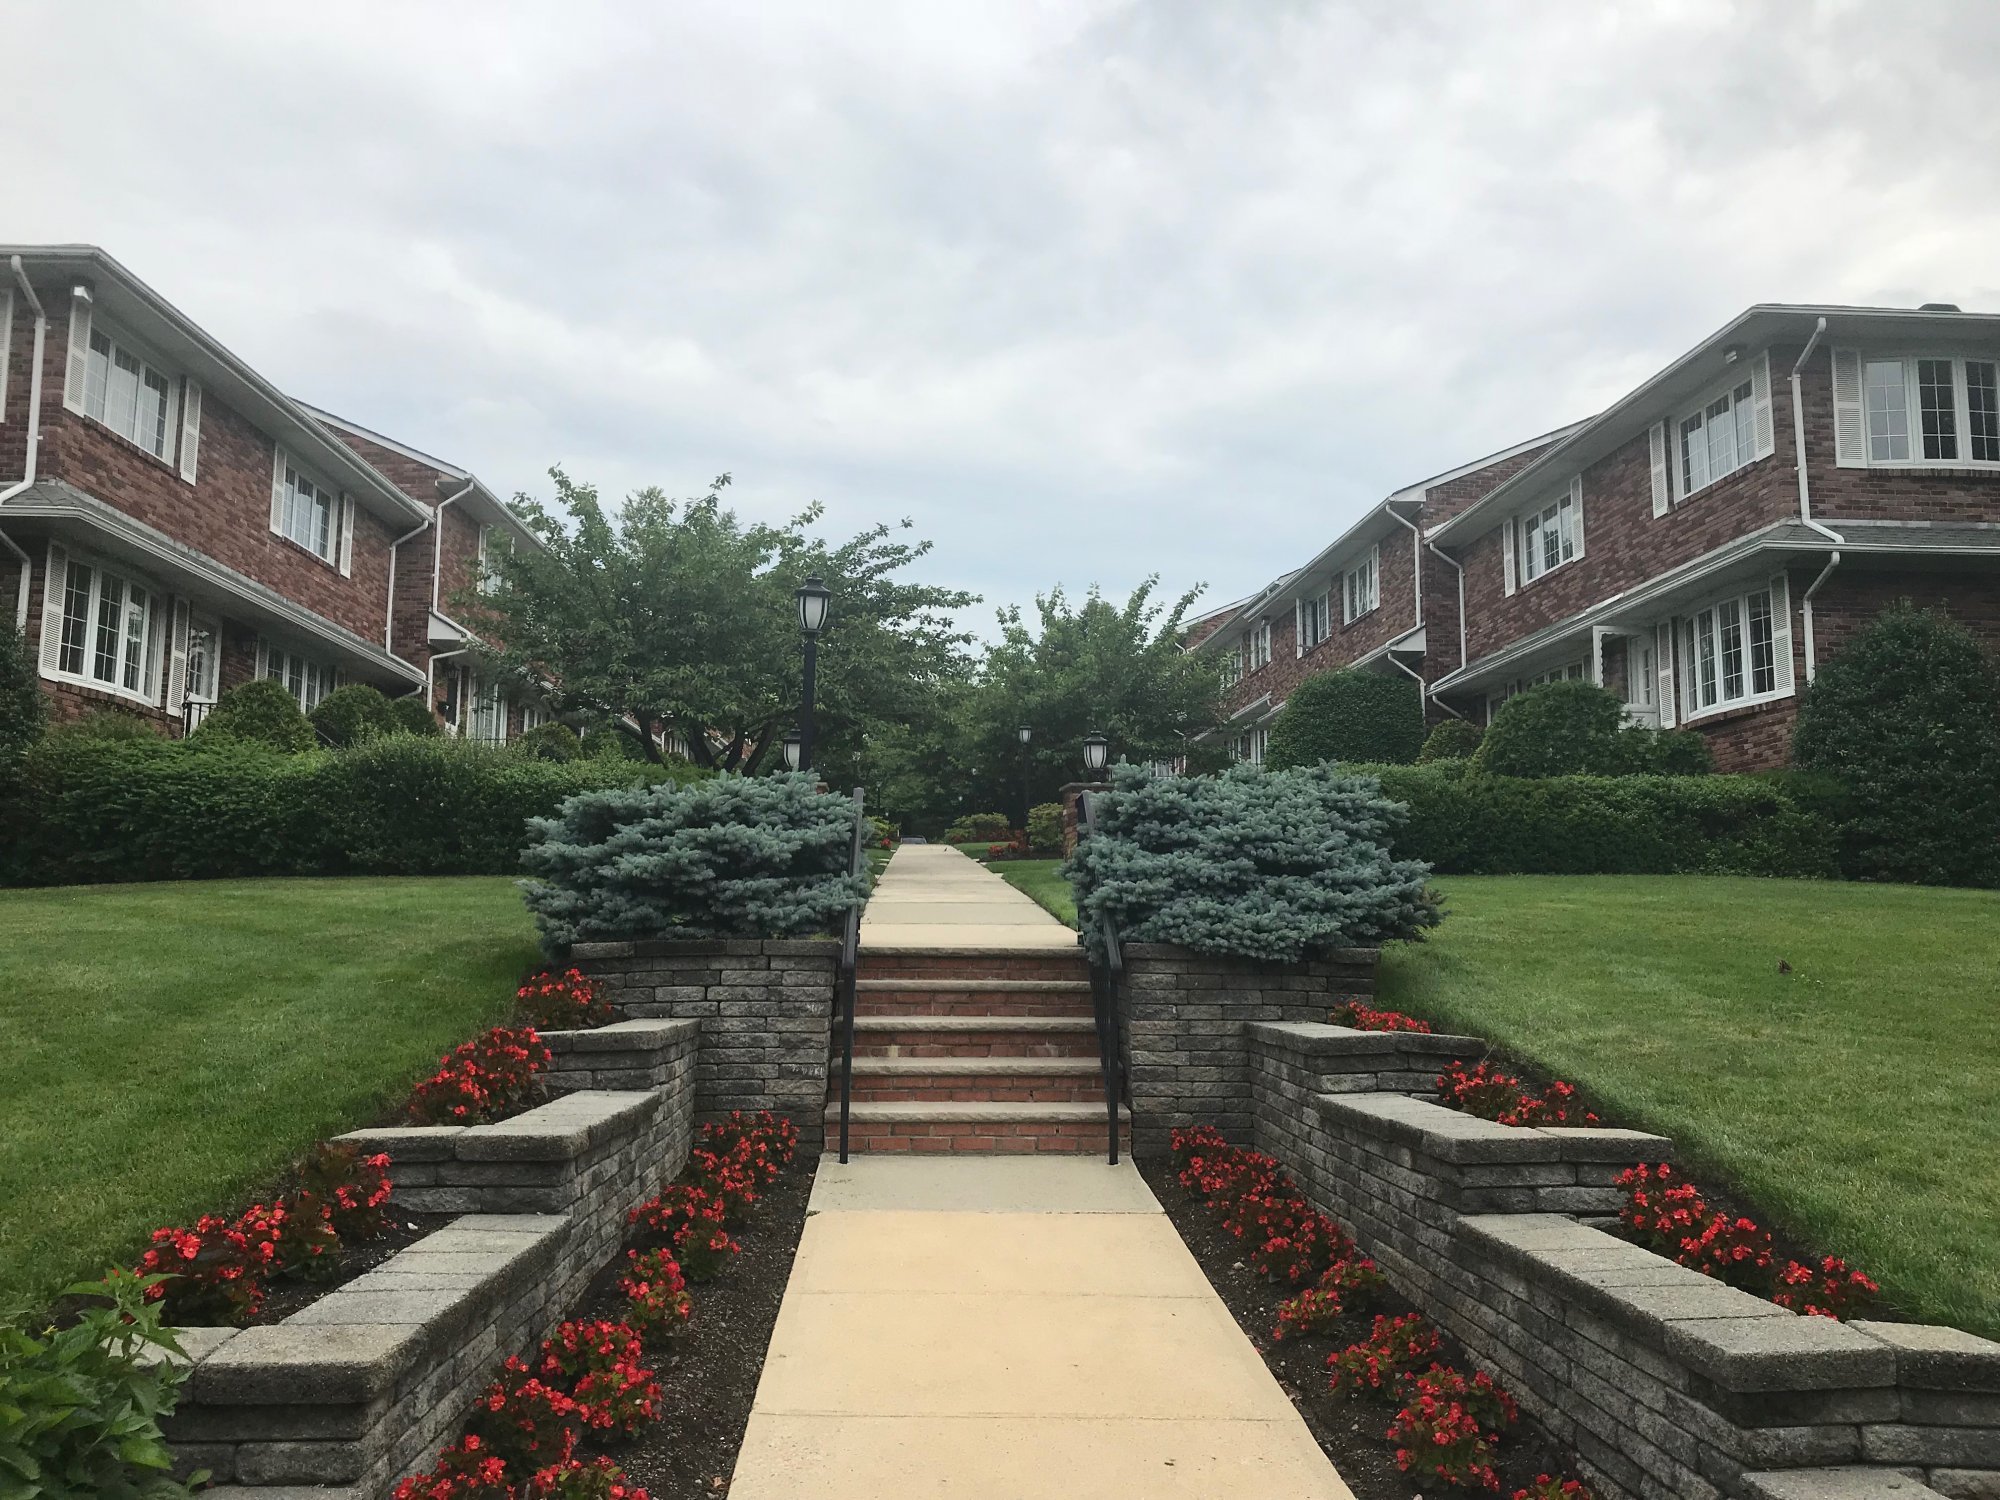 Townhomes for sale Summit Executive House Townhomes Summit, NJ